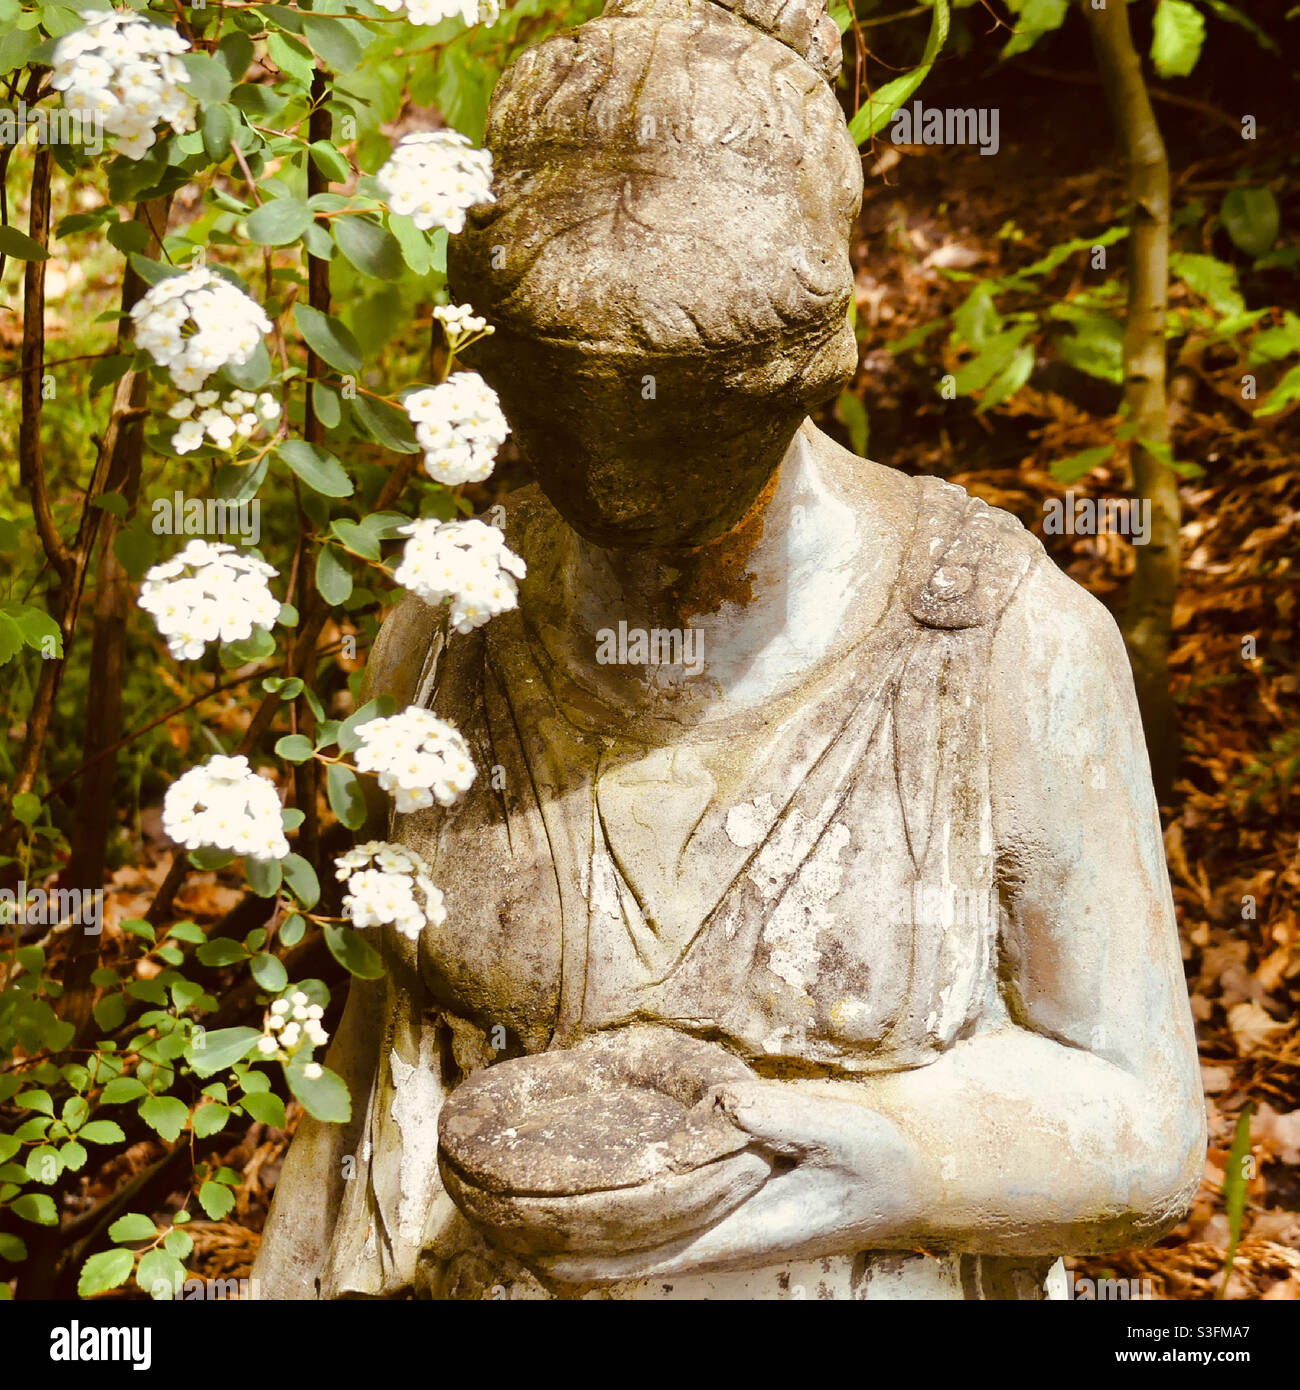 Thoughtful emotion from a garden statue. Symbolic of our times. Xx Stock Photo